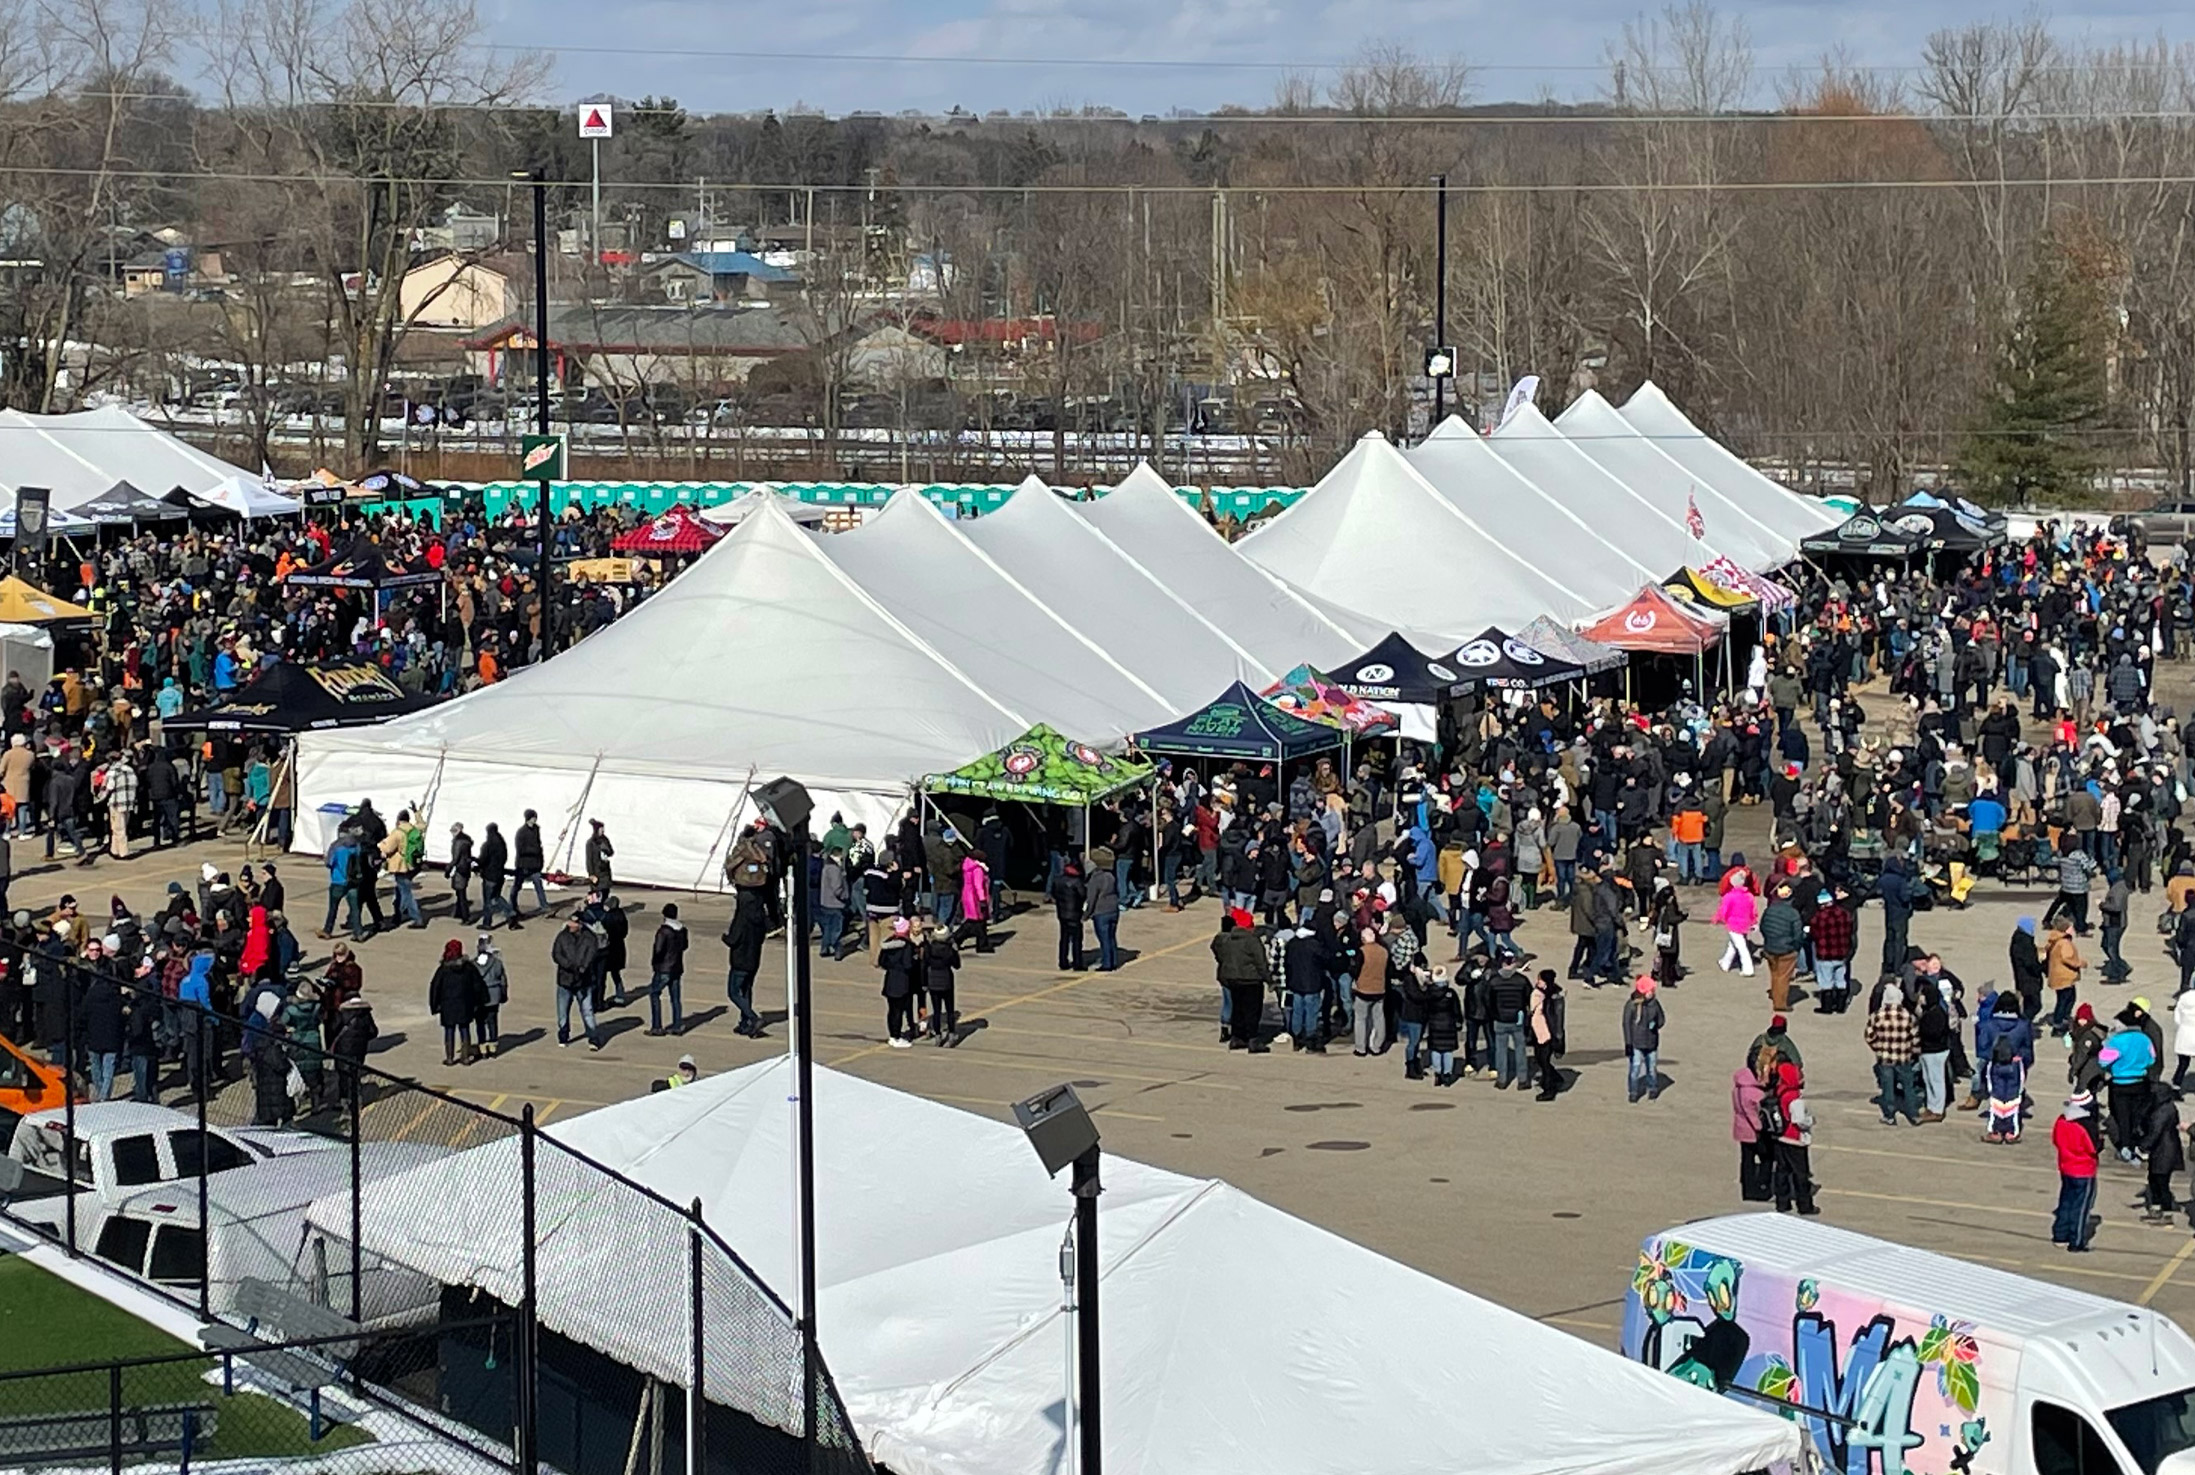 Come enjoy the annual Winter Beer Festival at LMCU Ballpark